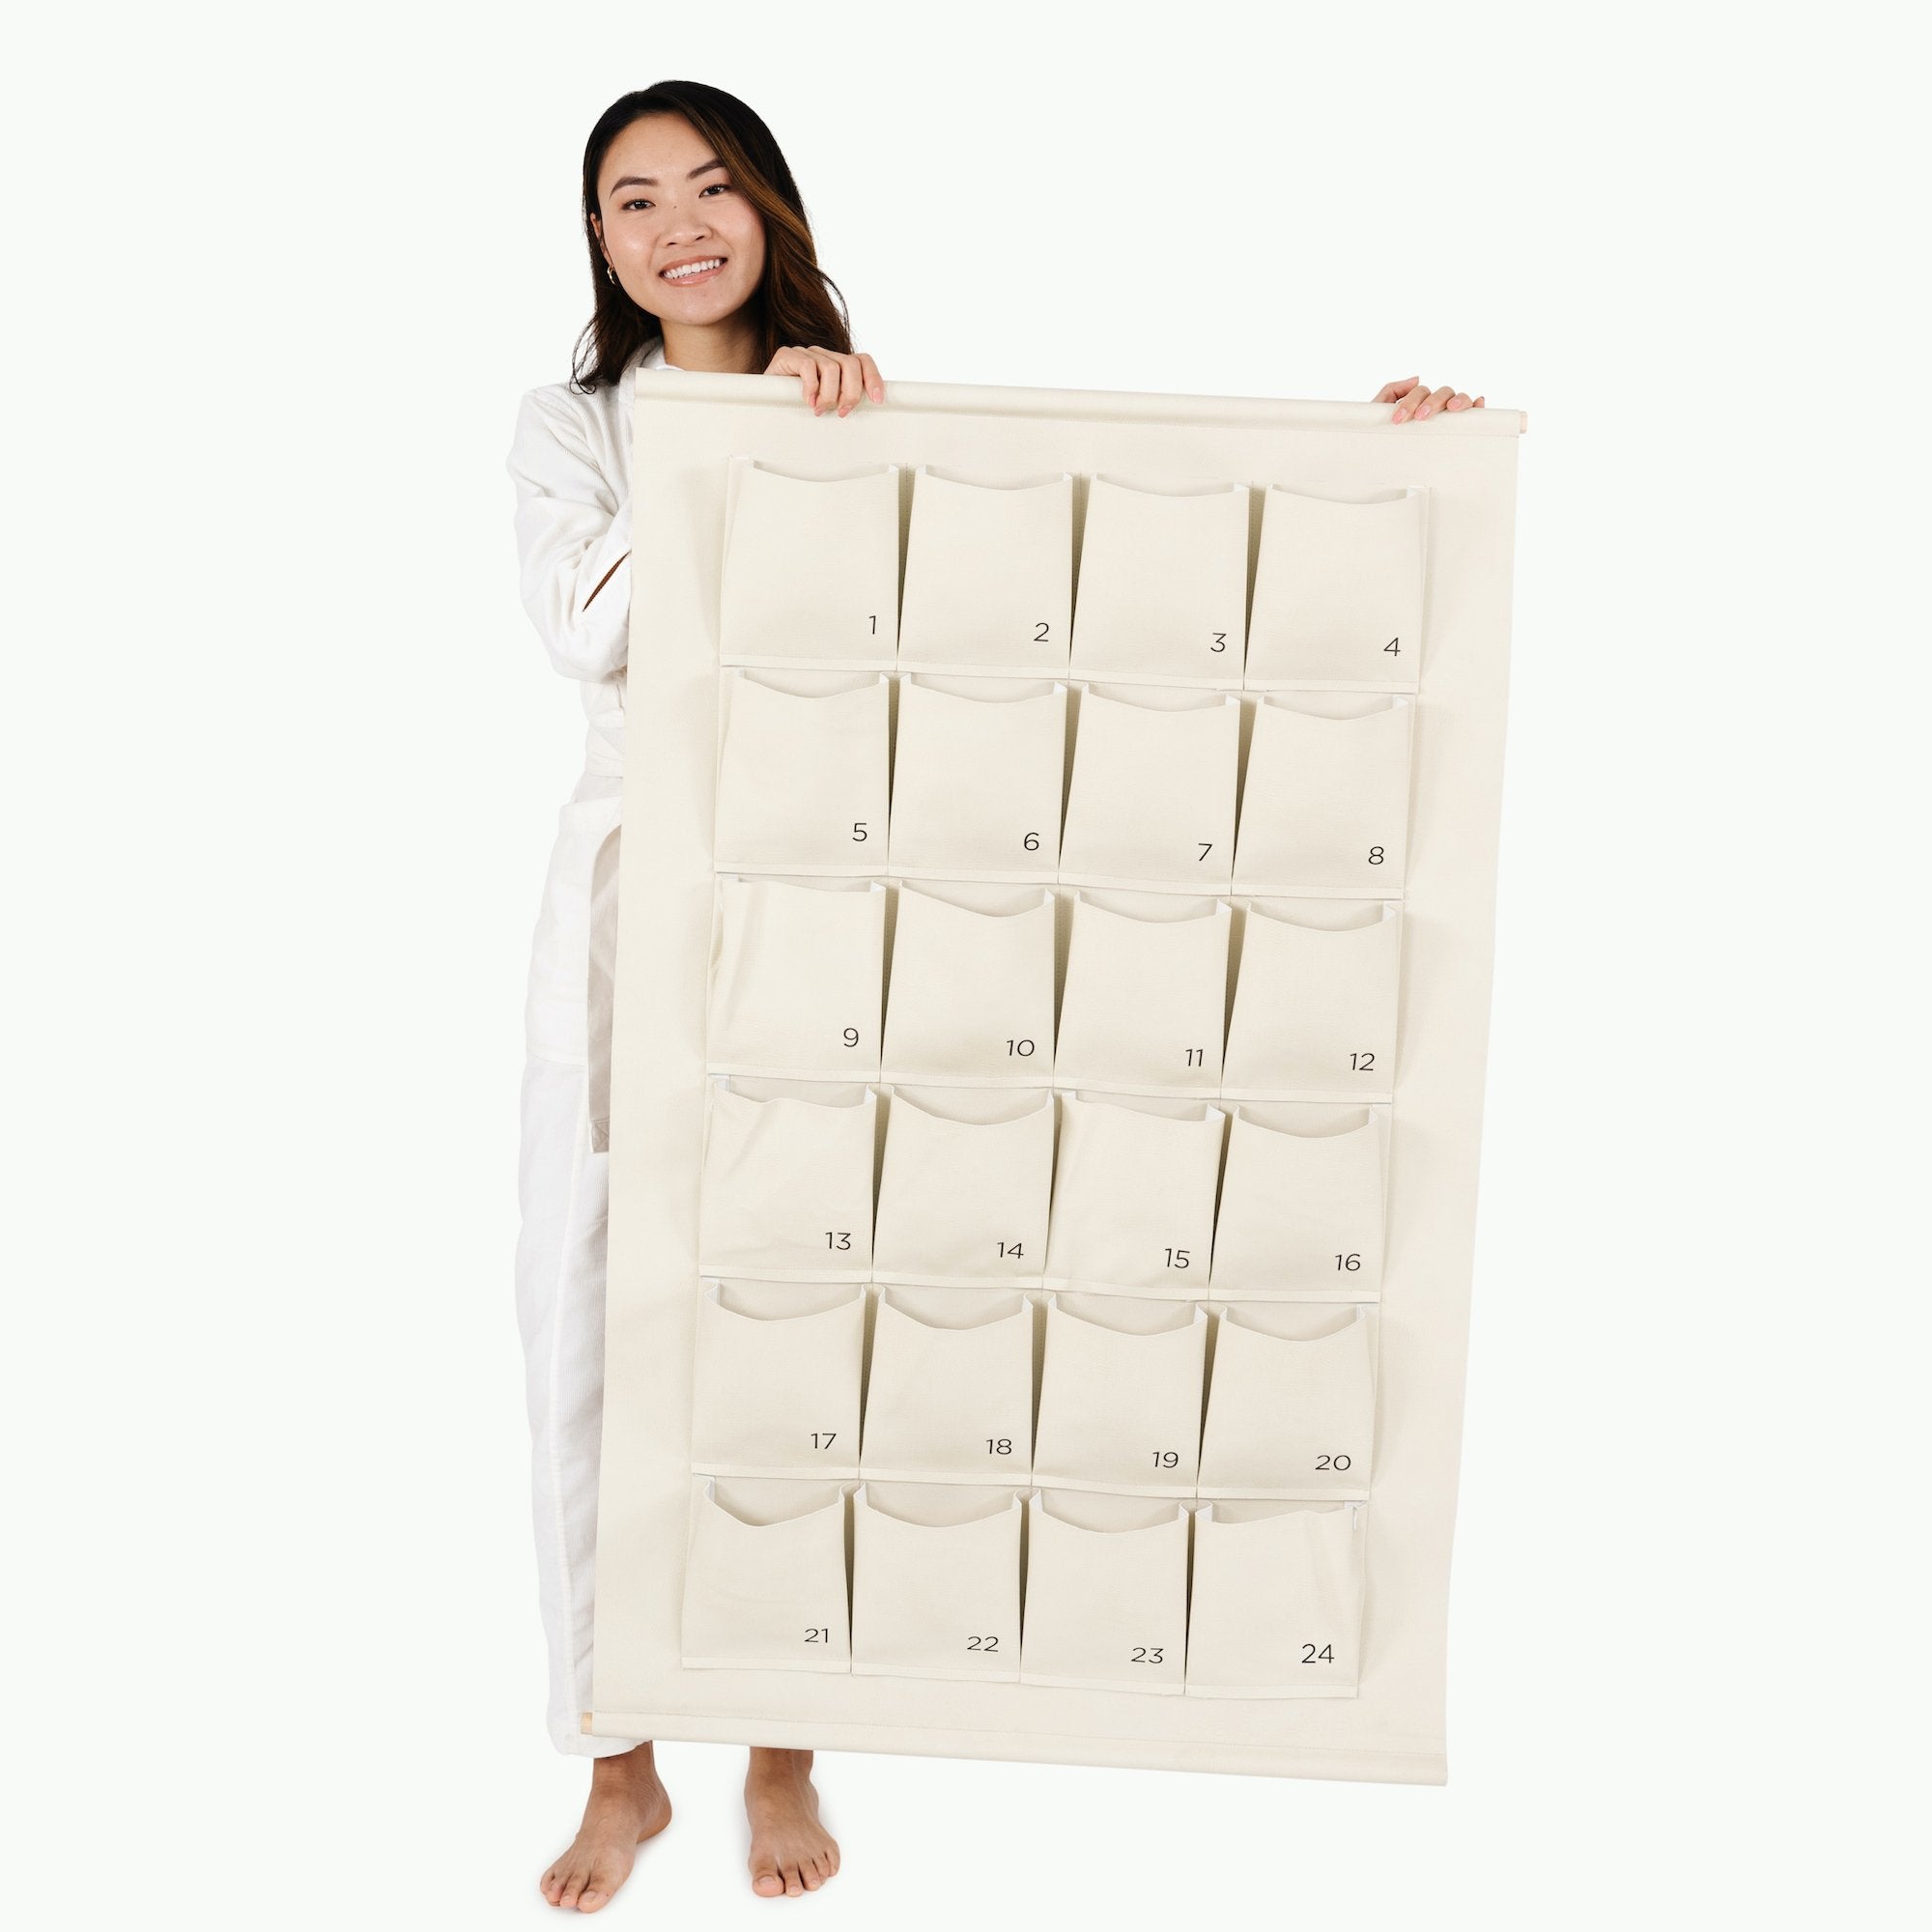 Ivory@woman holding the ivory large advent calendar